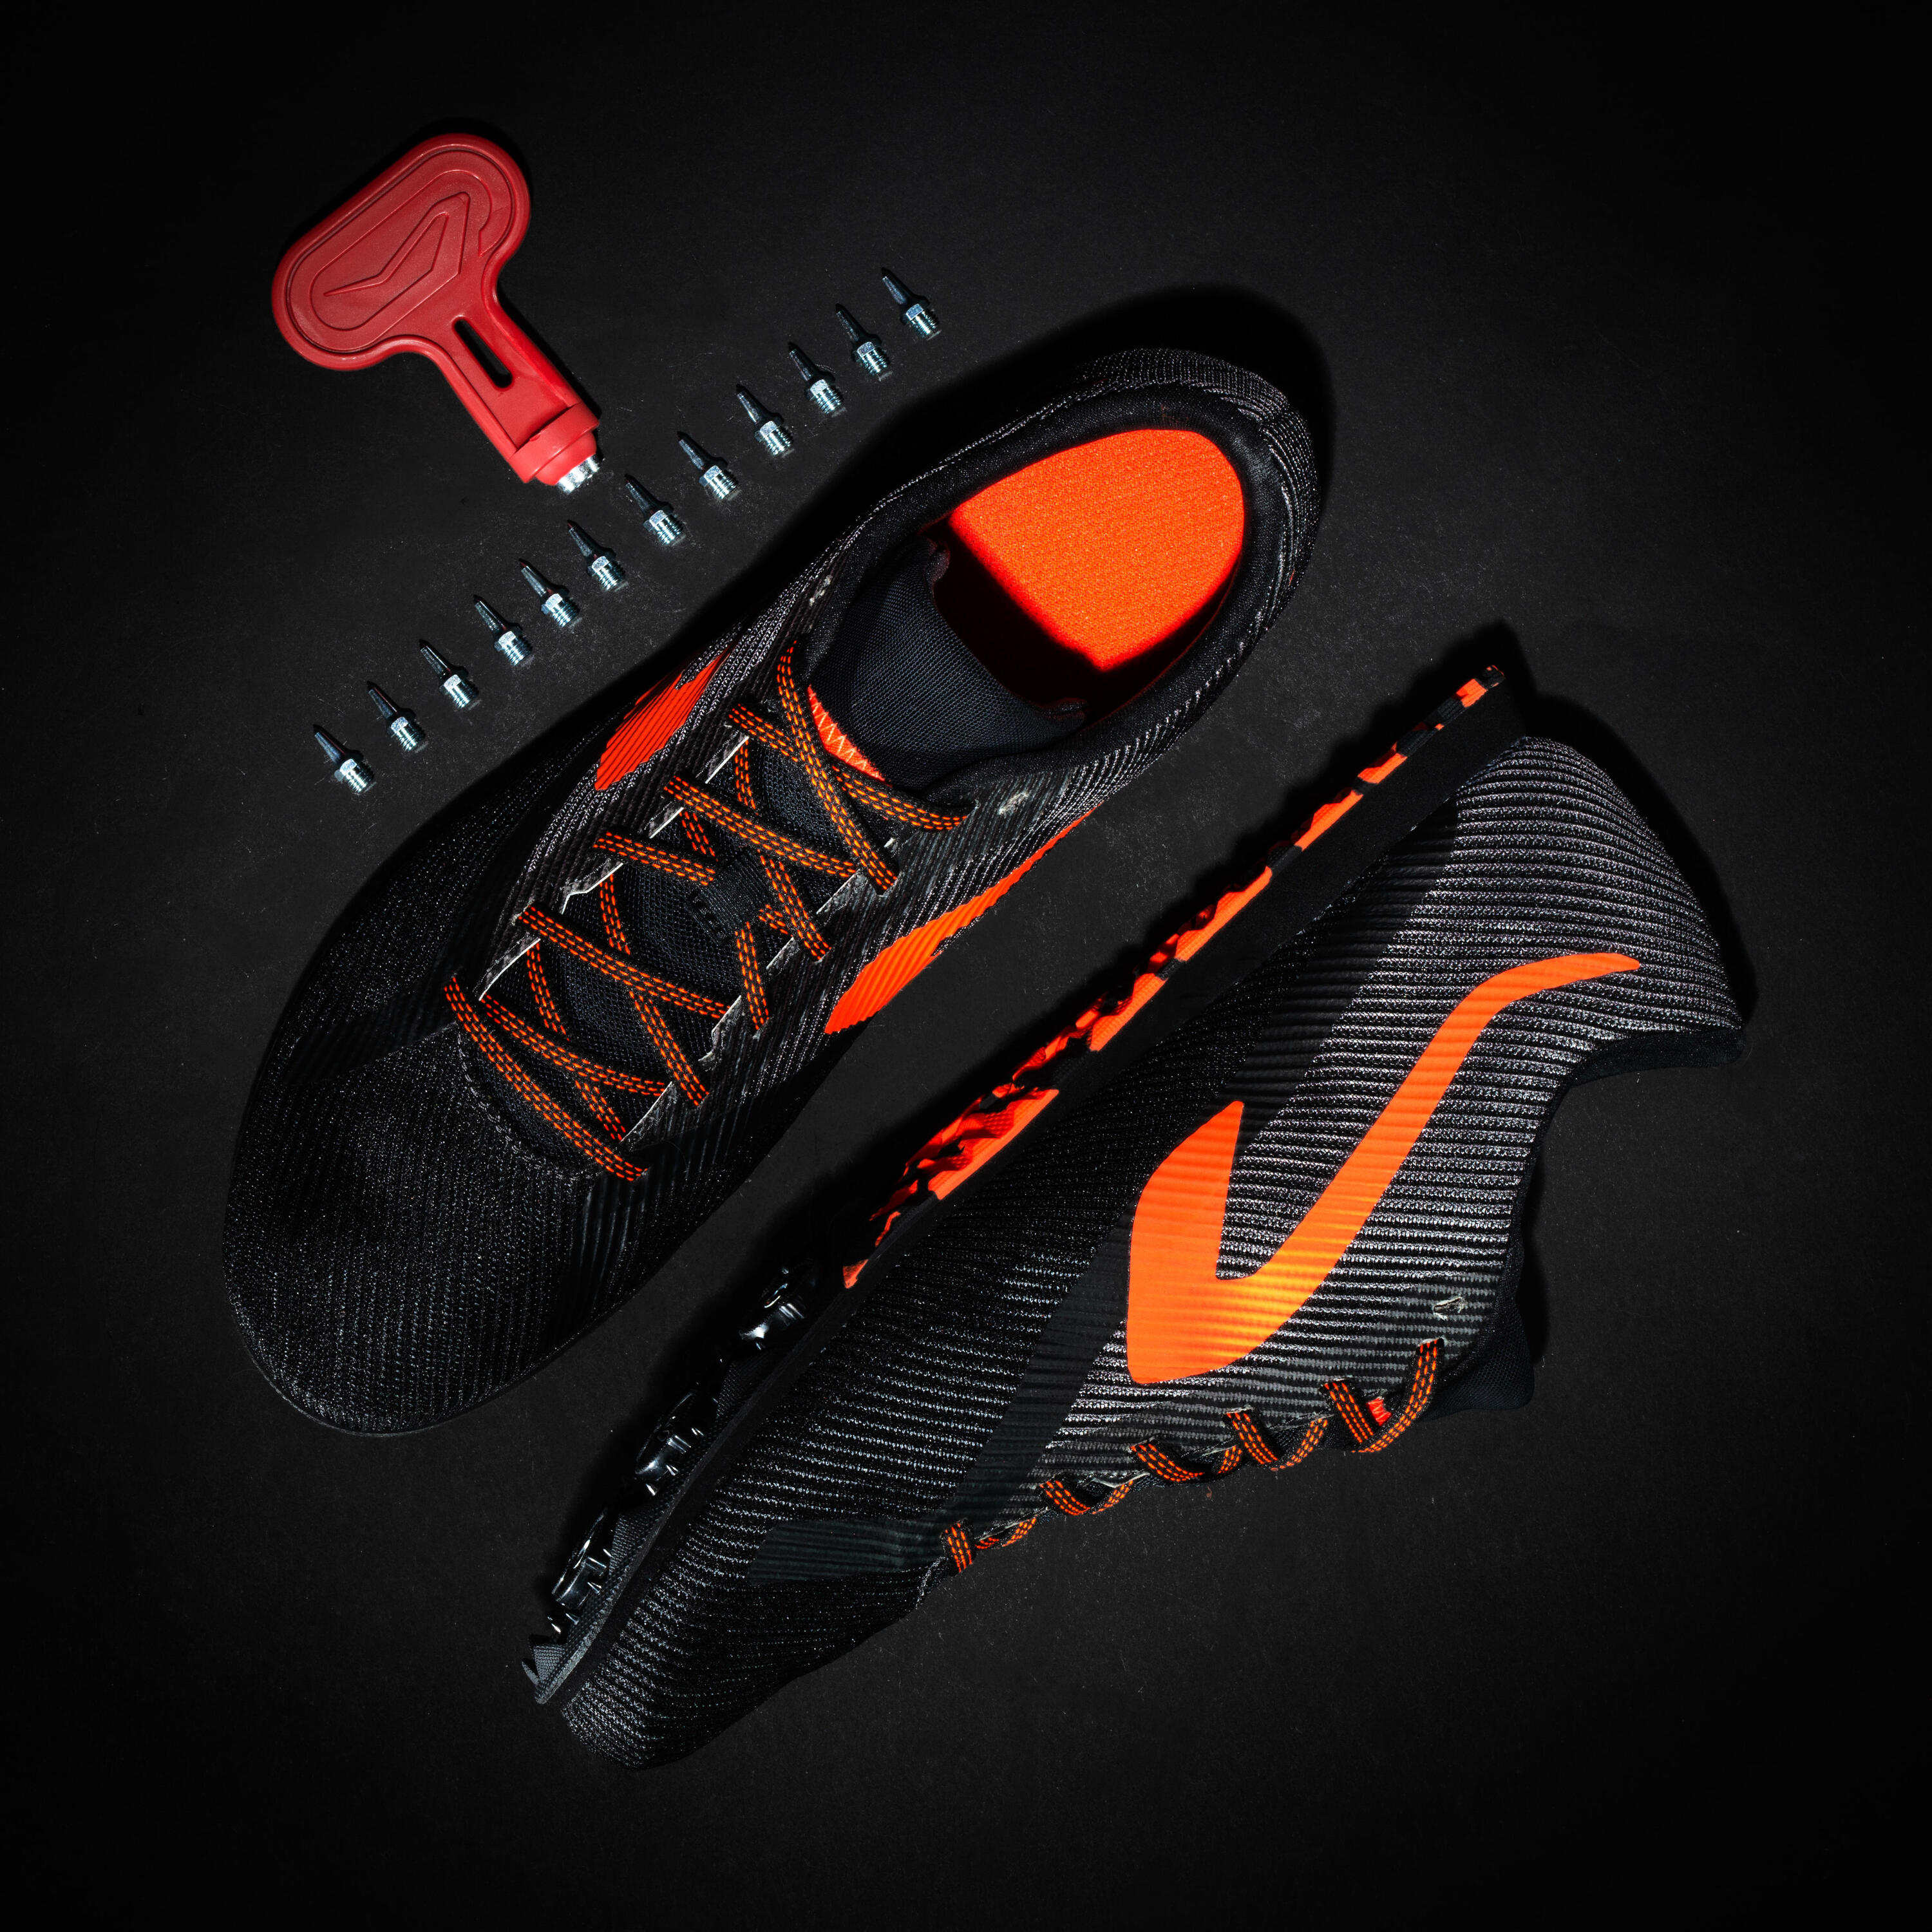 ATHLETICS CROSS-COUNTRY SHOES WITH SPIKES - BLACK/ORANGE 8/8